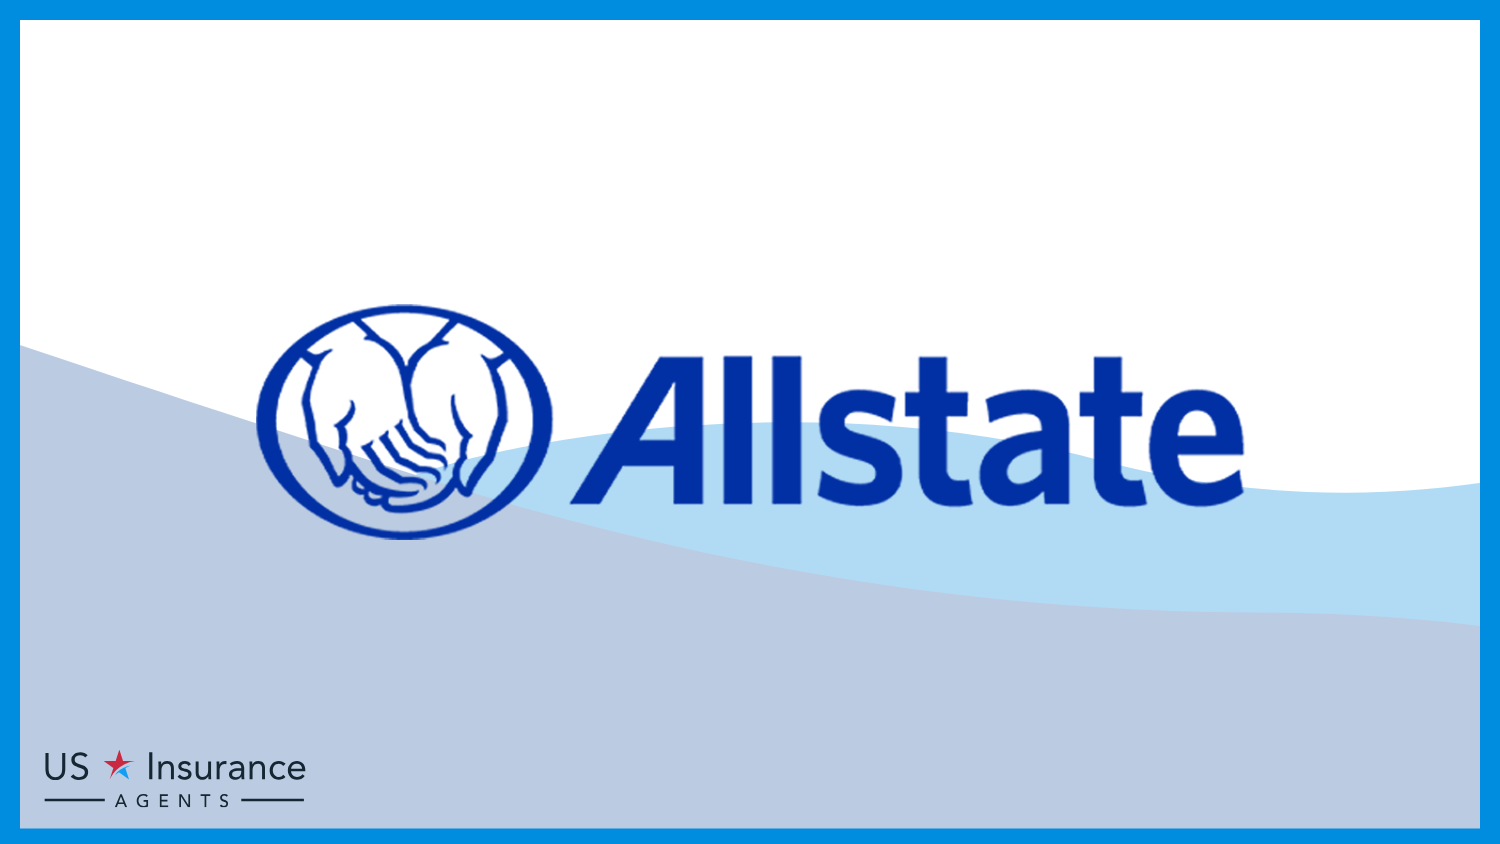 Allstate: Best Car Insurance for Young Adults